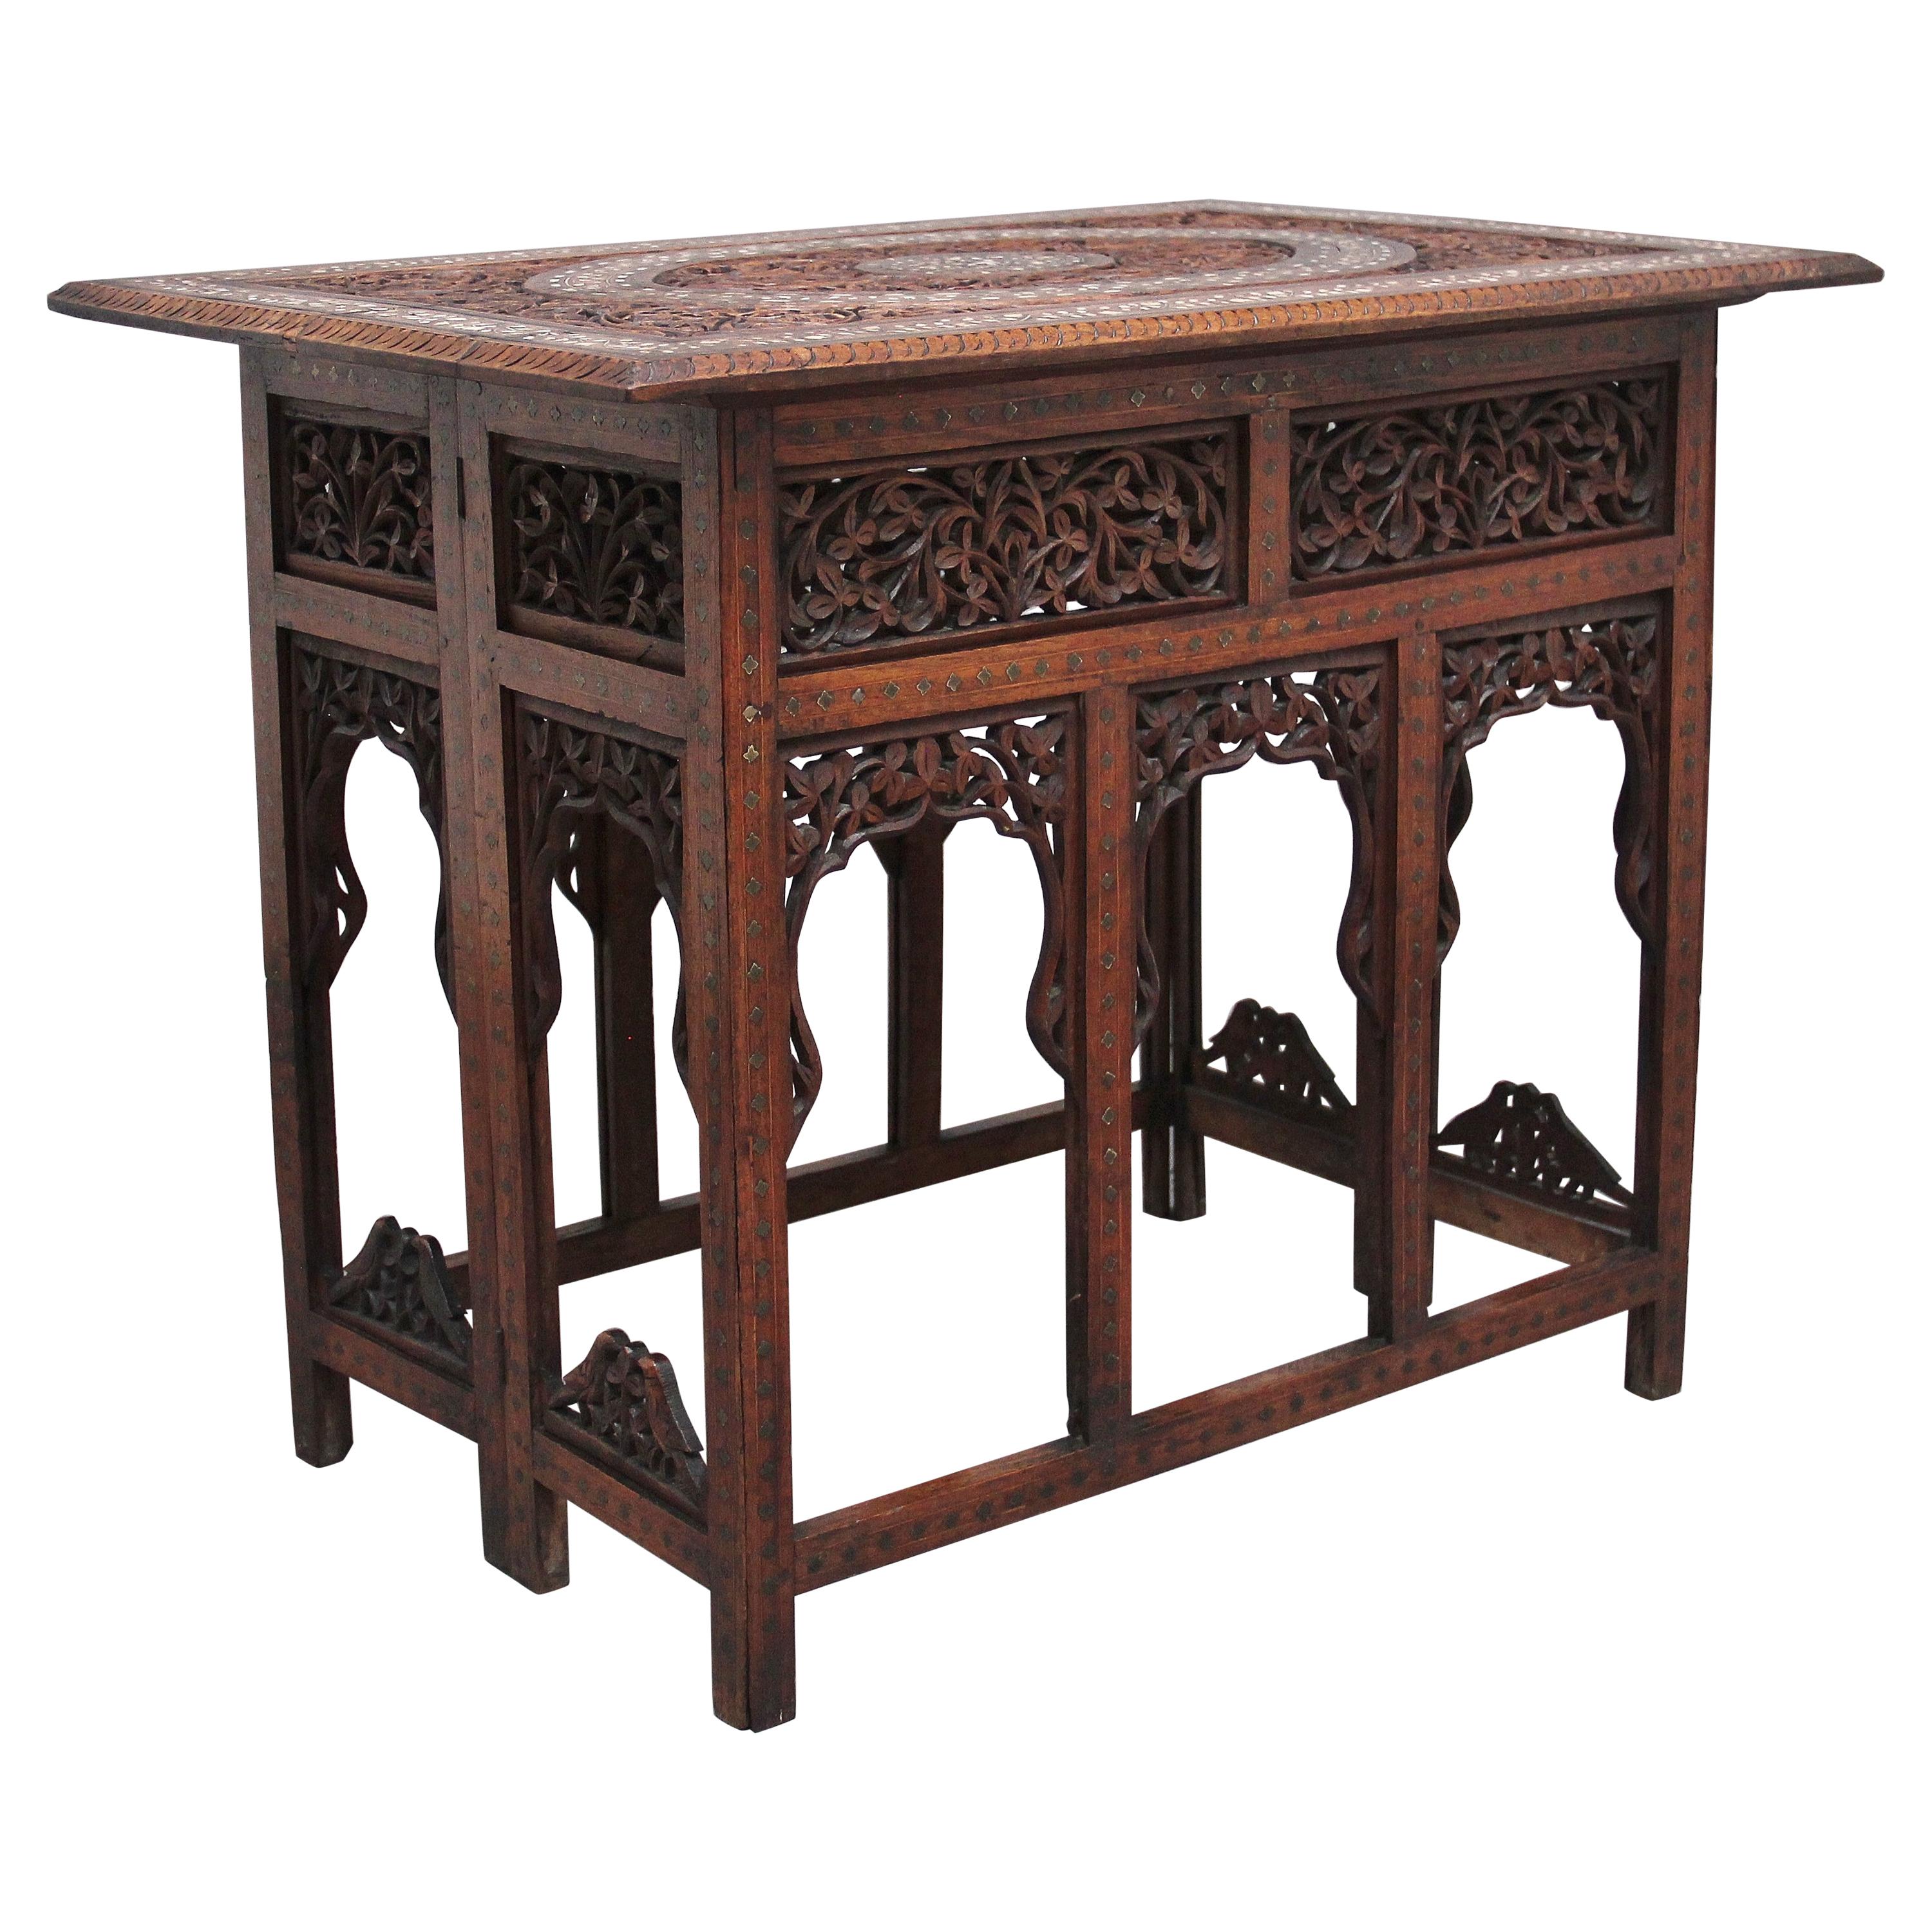 19th Century Carved Indian Occasional Table